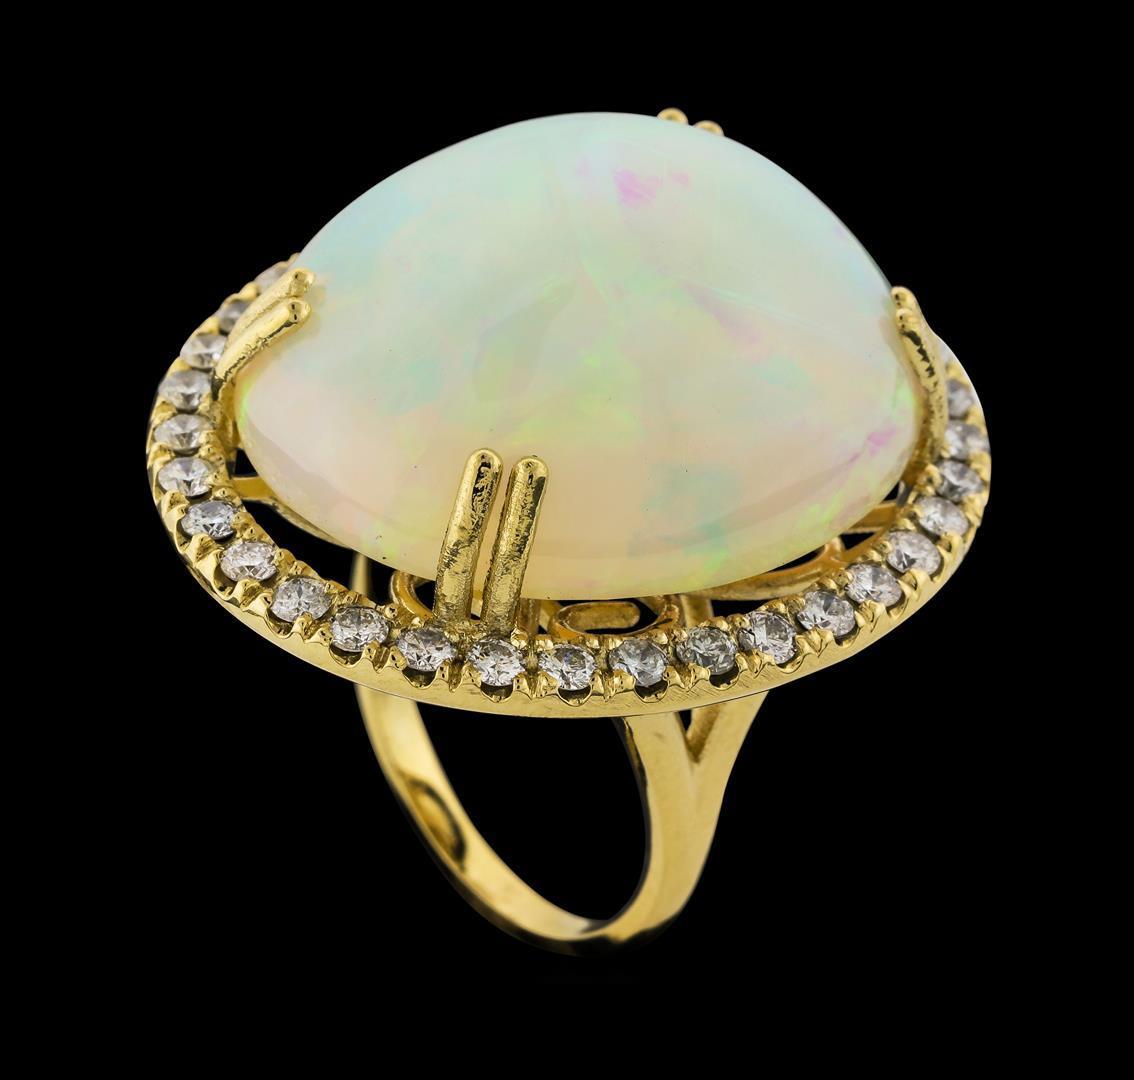 25.20 ctw Opal and Diamond Ring - 14KT Yellow Gold